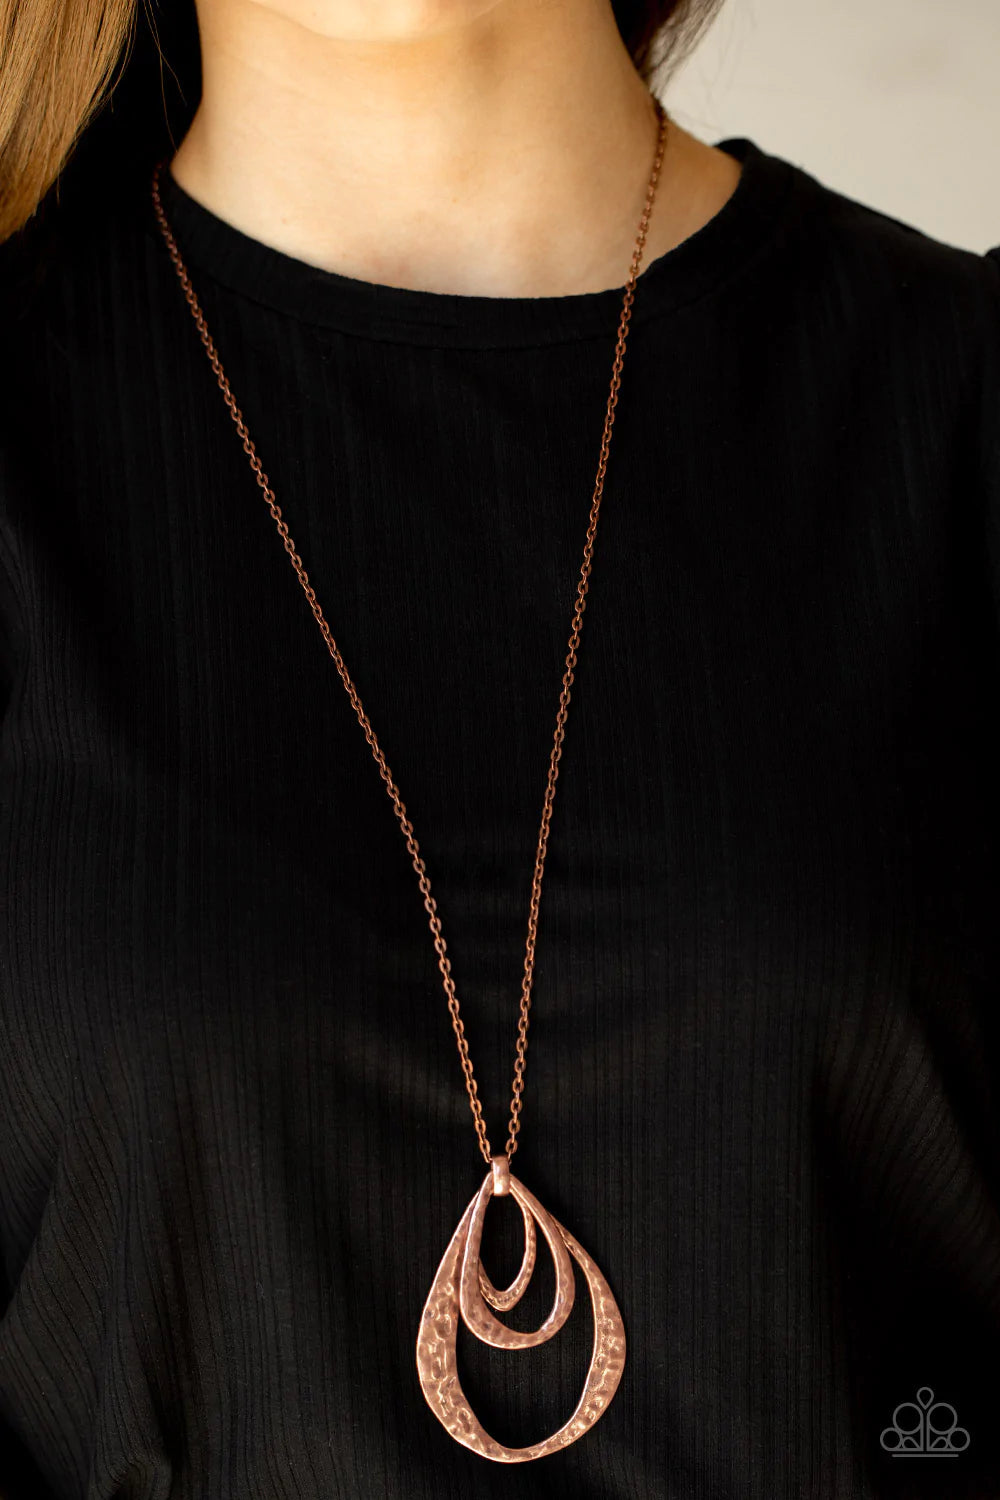 Paparazzi Accessories Relic Renaissance - Copper Hammered in a rustic finish, an oversized collection of asymmetrical copper teardrops layer at the bottom of a lengthened copper chain for an artisan inspired look. Features an adjustable clasp closure. Sol